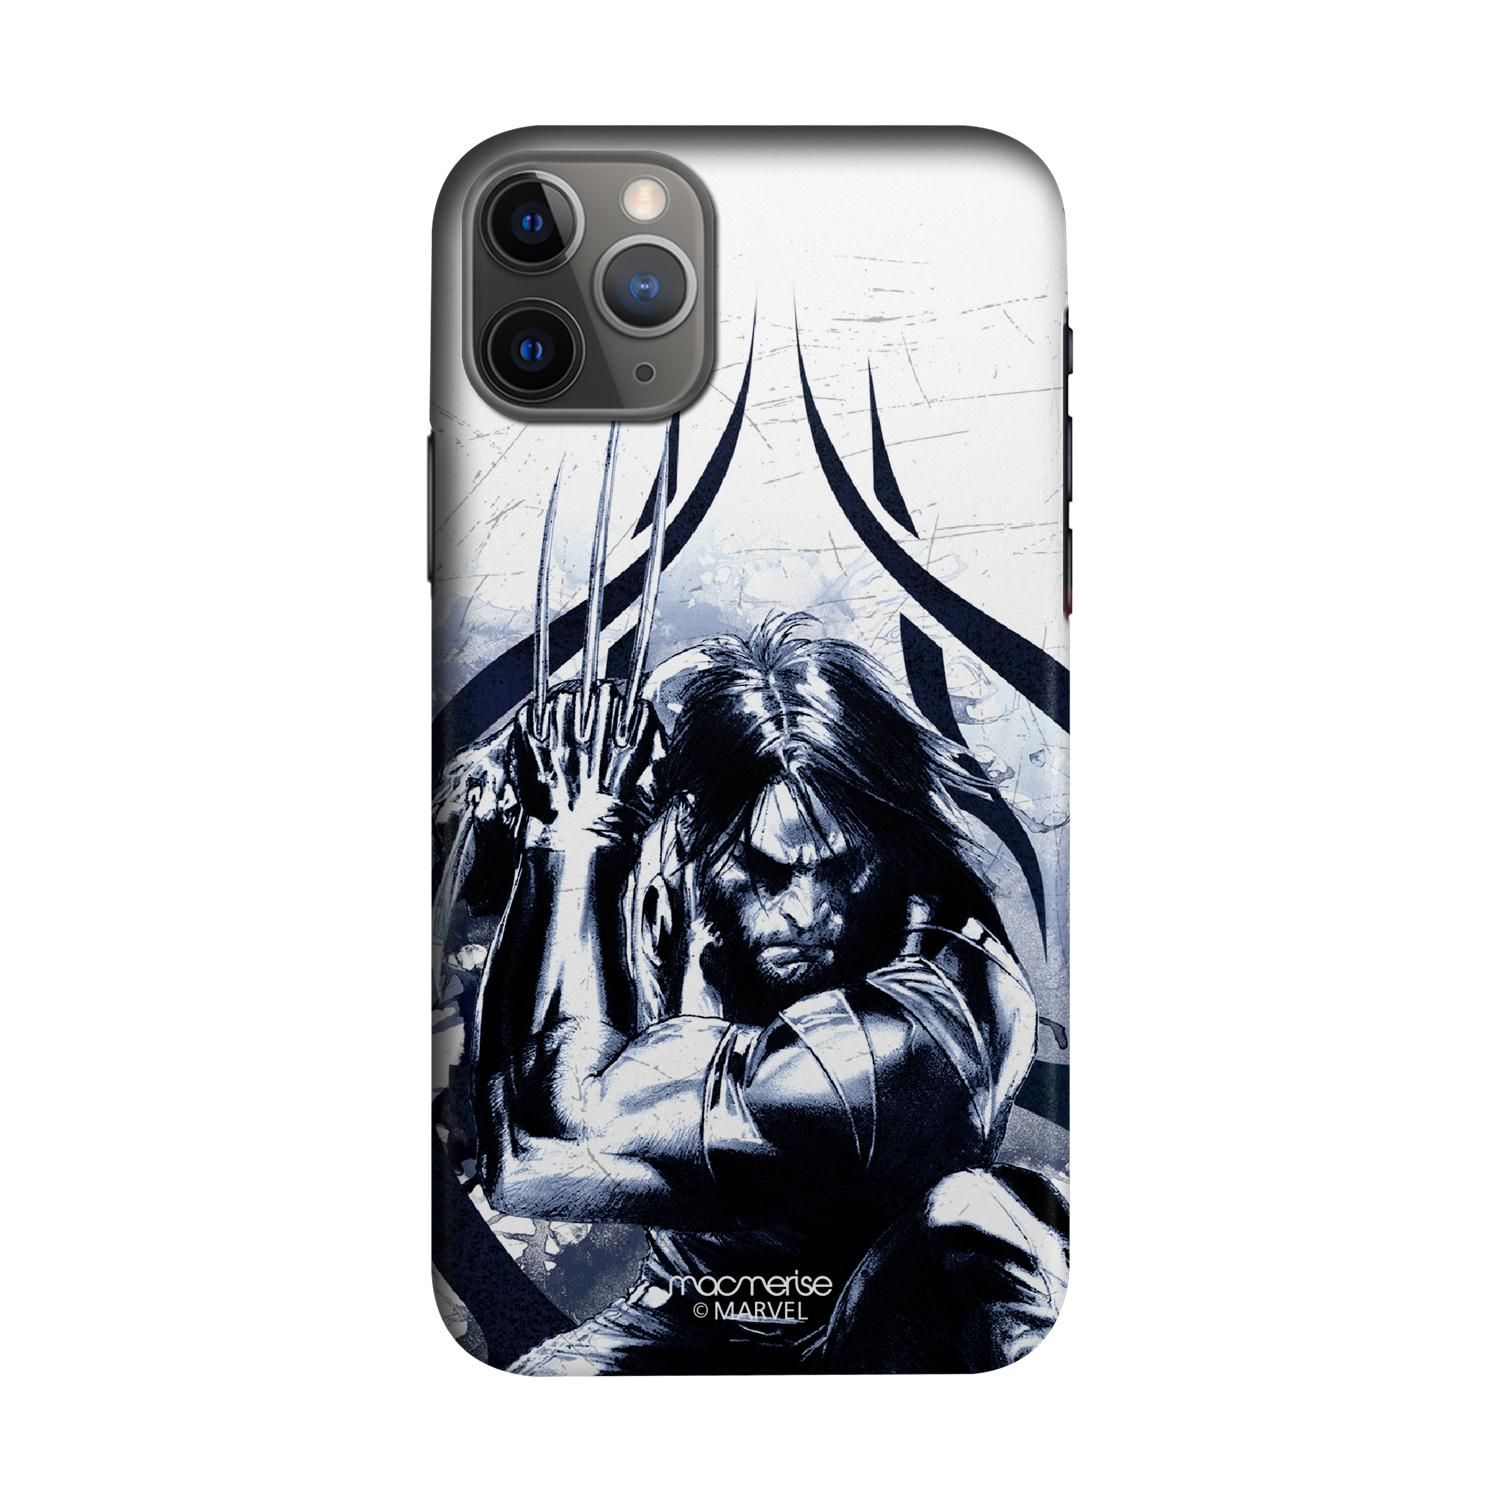 Lethal Logan - Sleek Phone Case for iPhone 11 Pro Max